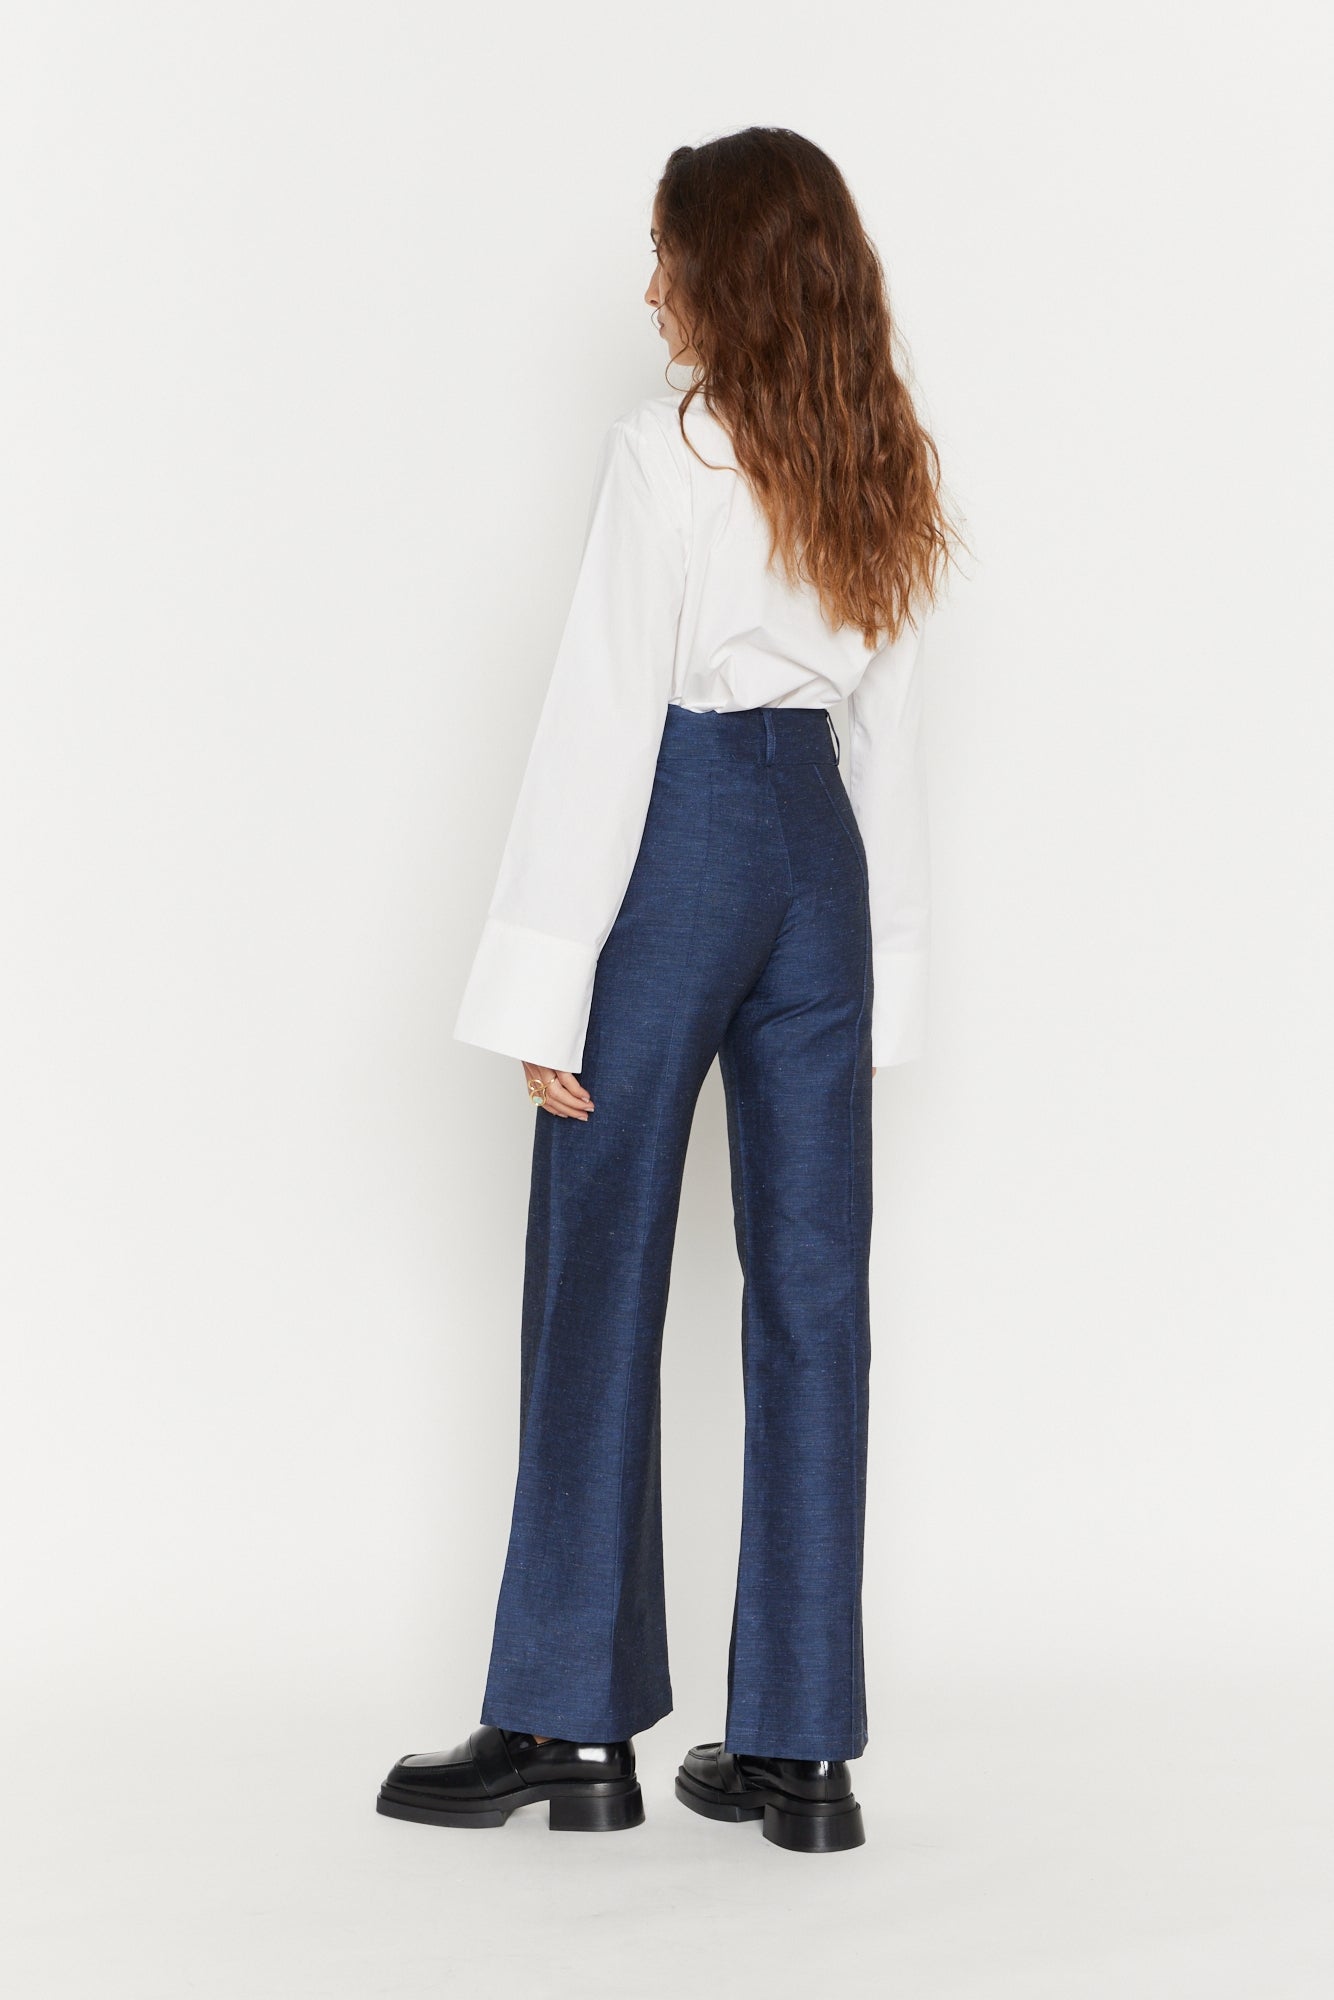 Navy Blue Flared Pants